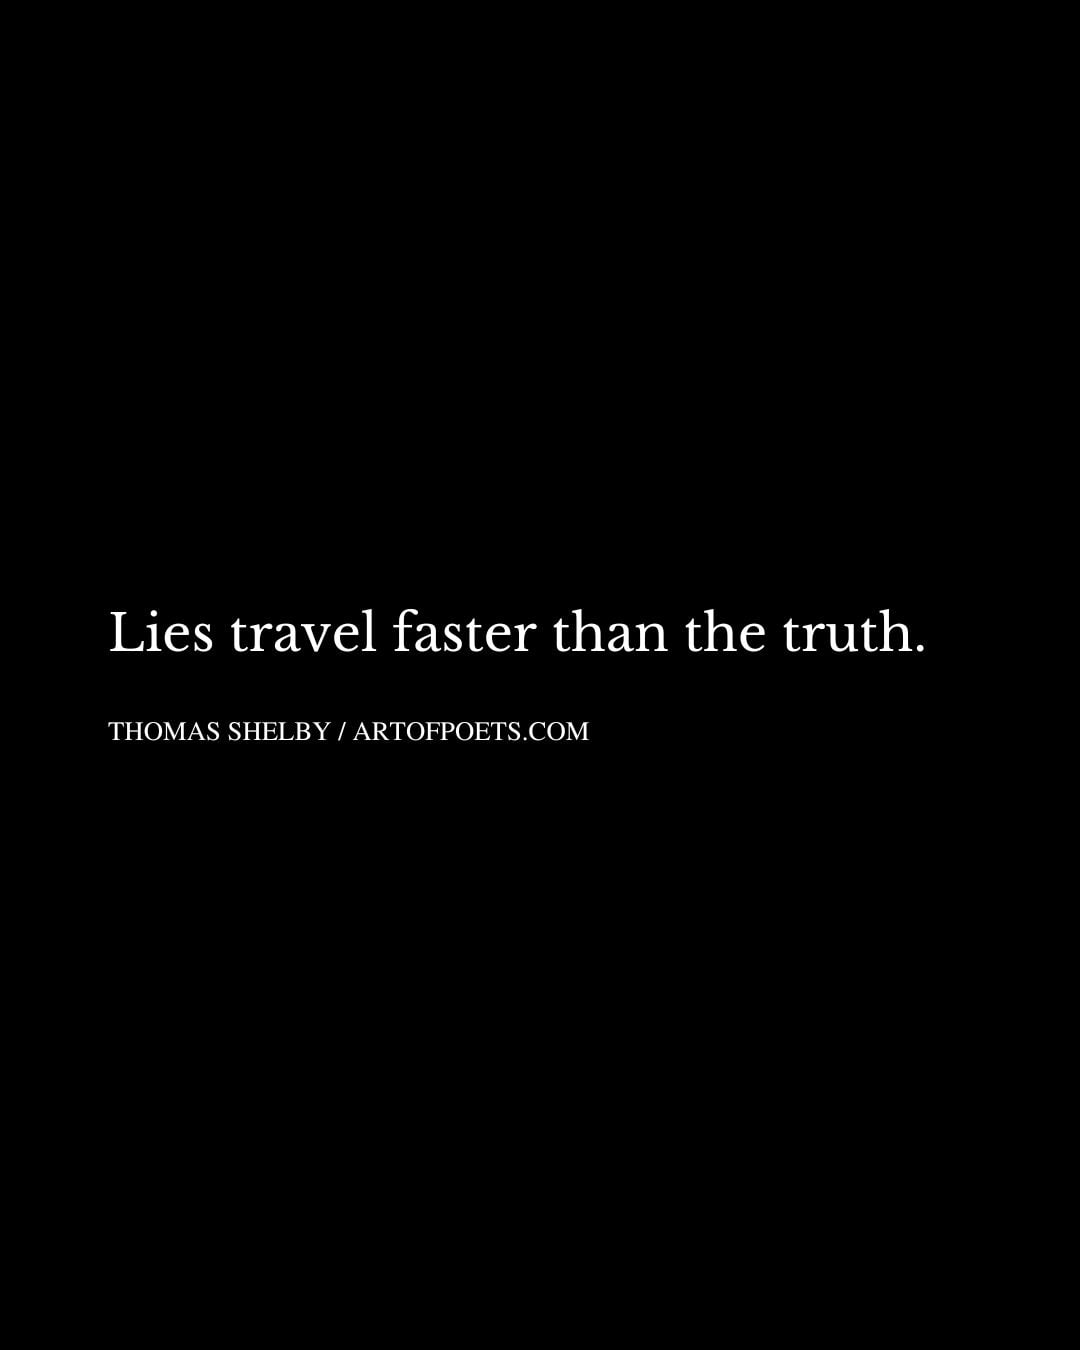 Lies travel faster than the truth